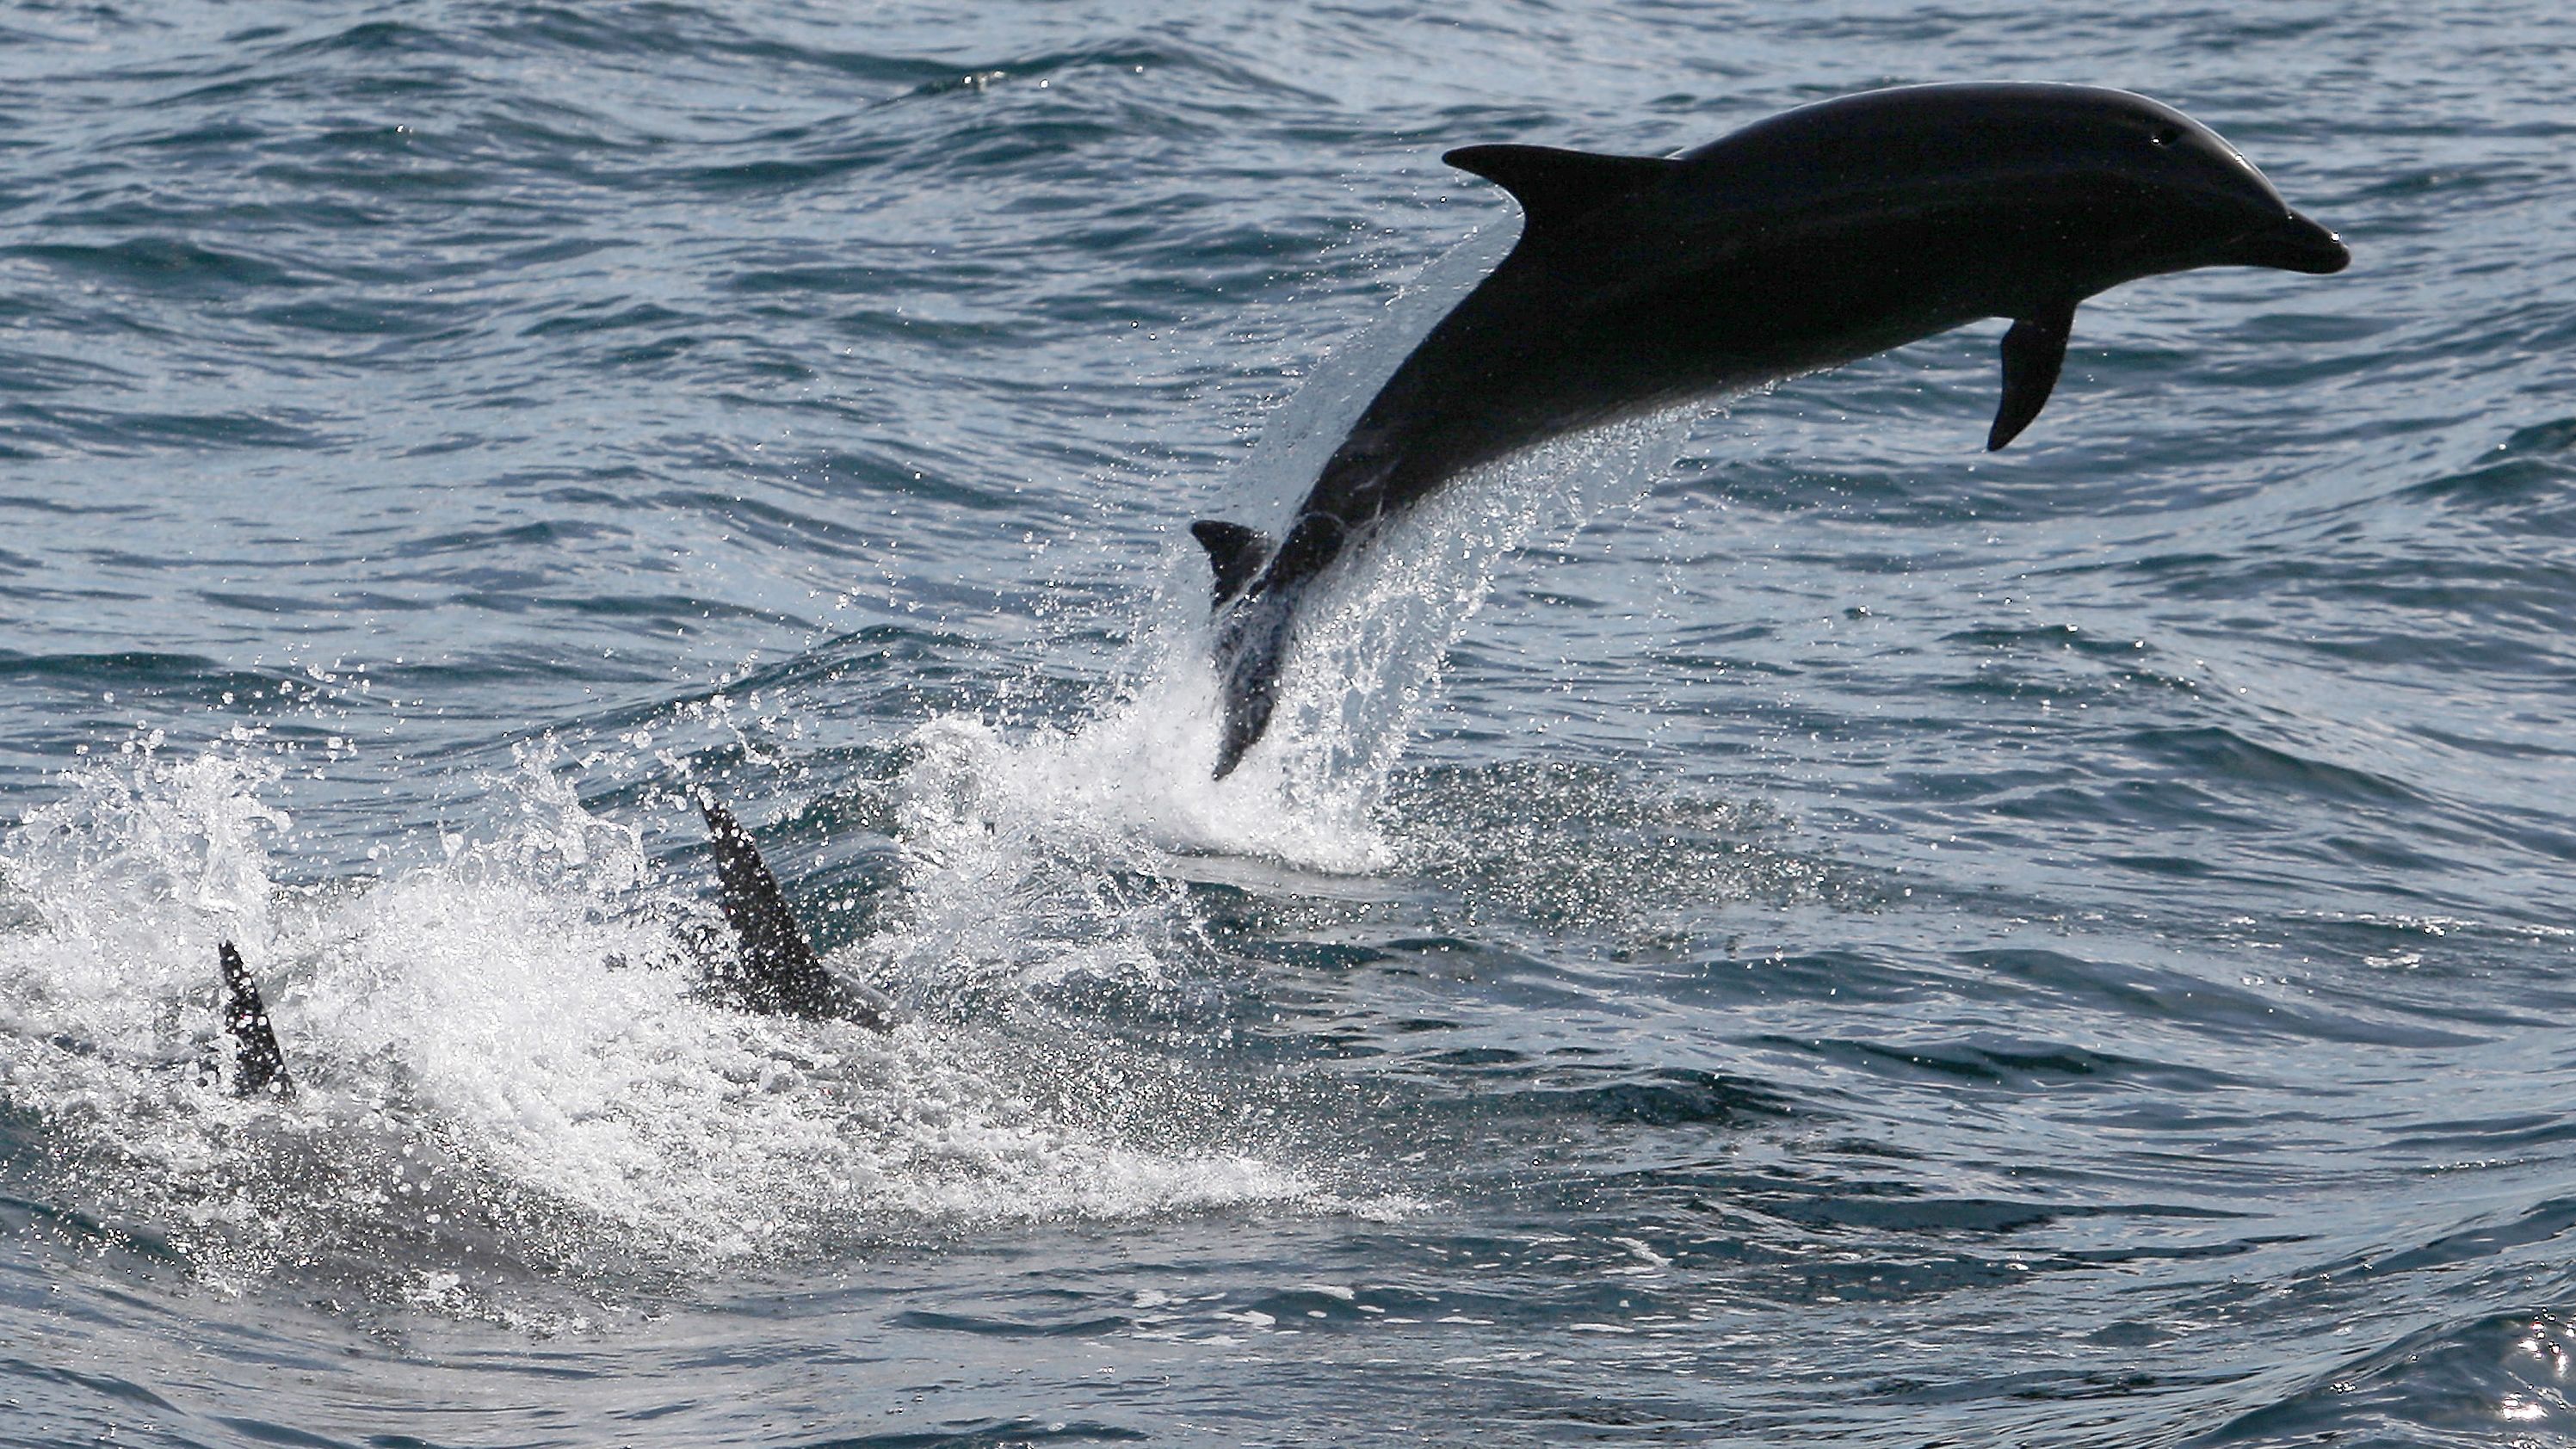  Bottlenose dolphins leap off the Southern California coast.